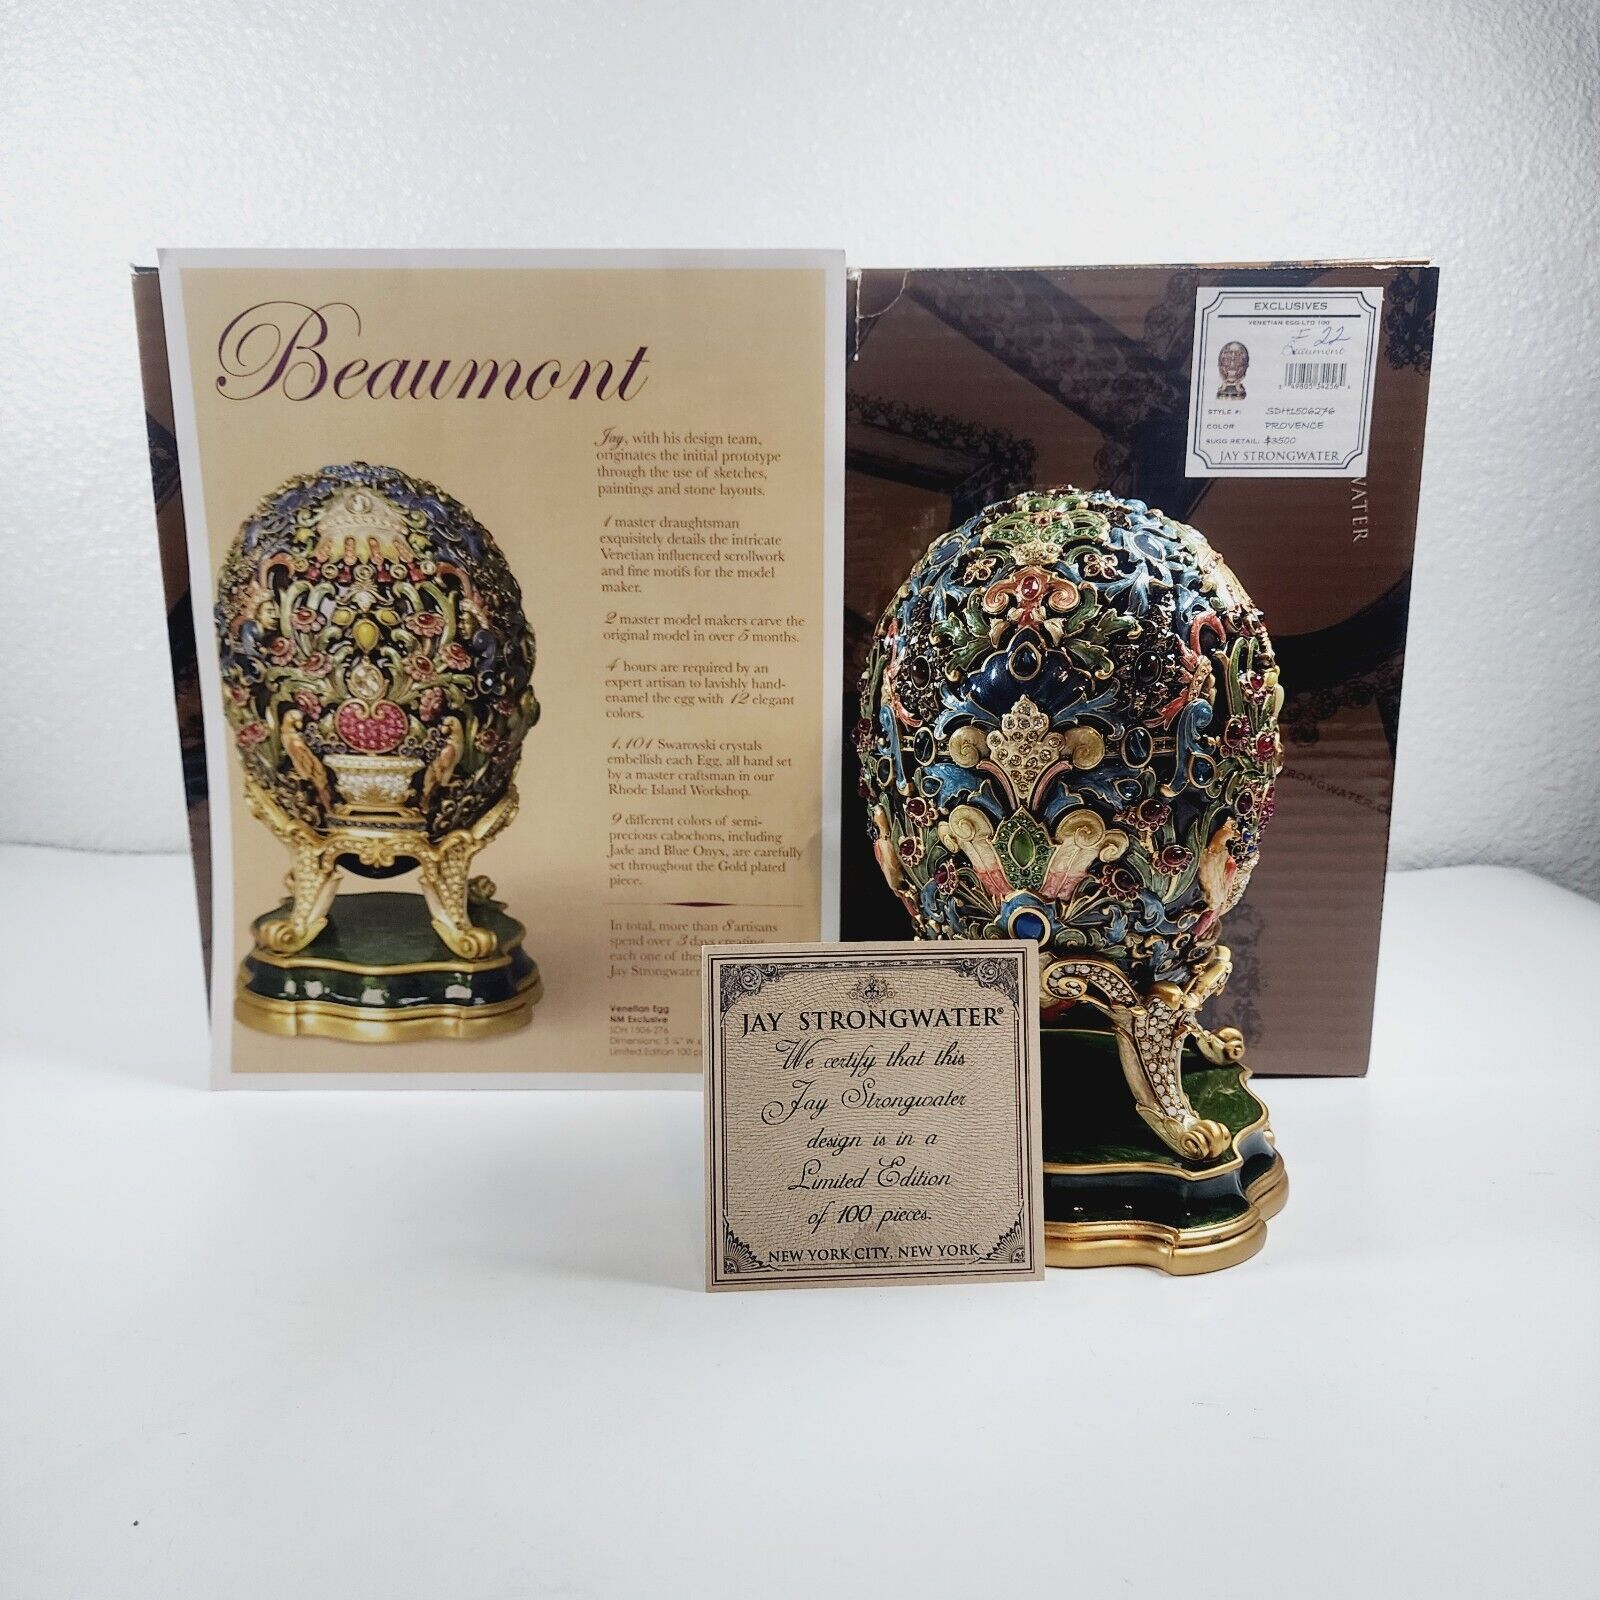 JAY STRONGWATER BEAUMONT VENETIAN EGG - LIMITED EDITION 22/100 Stunning